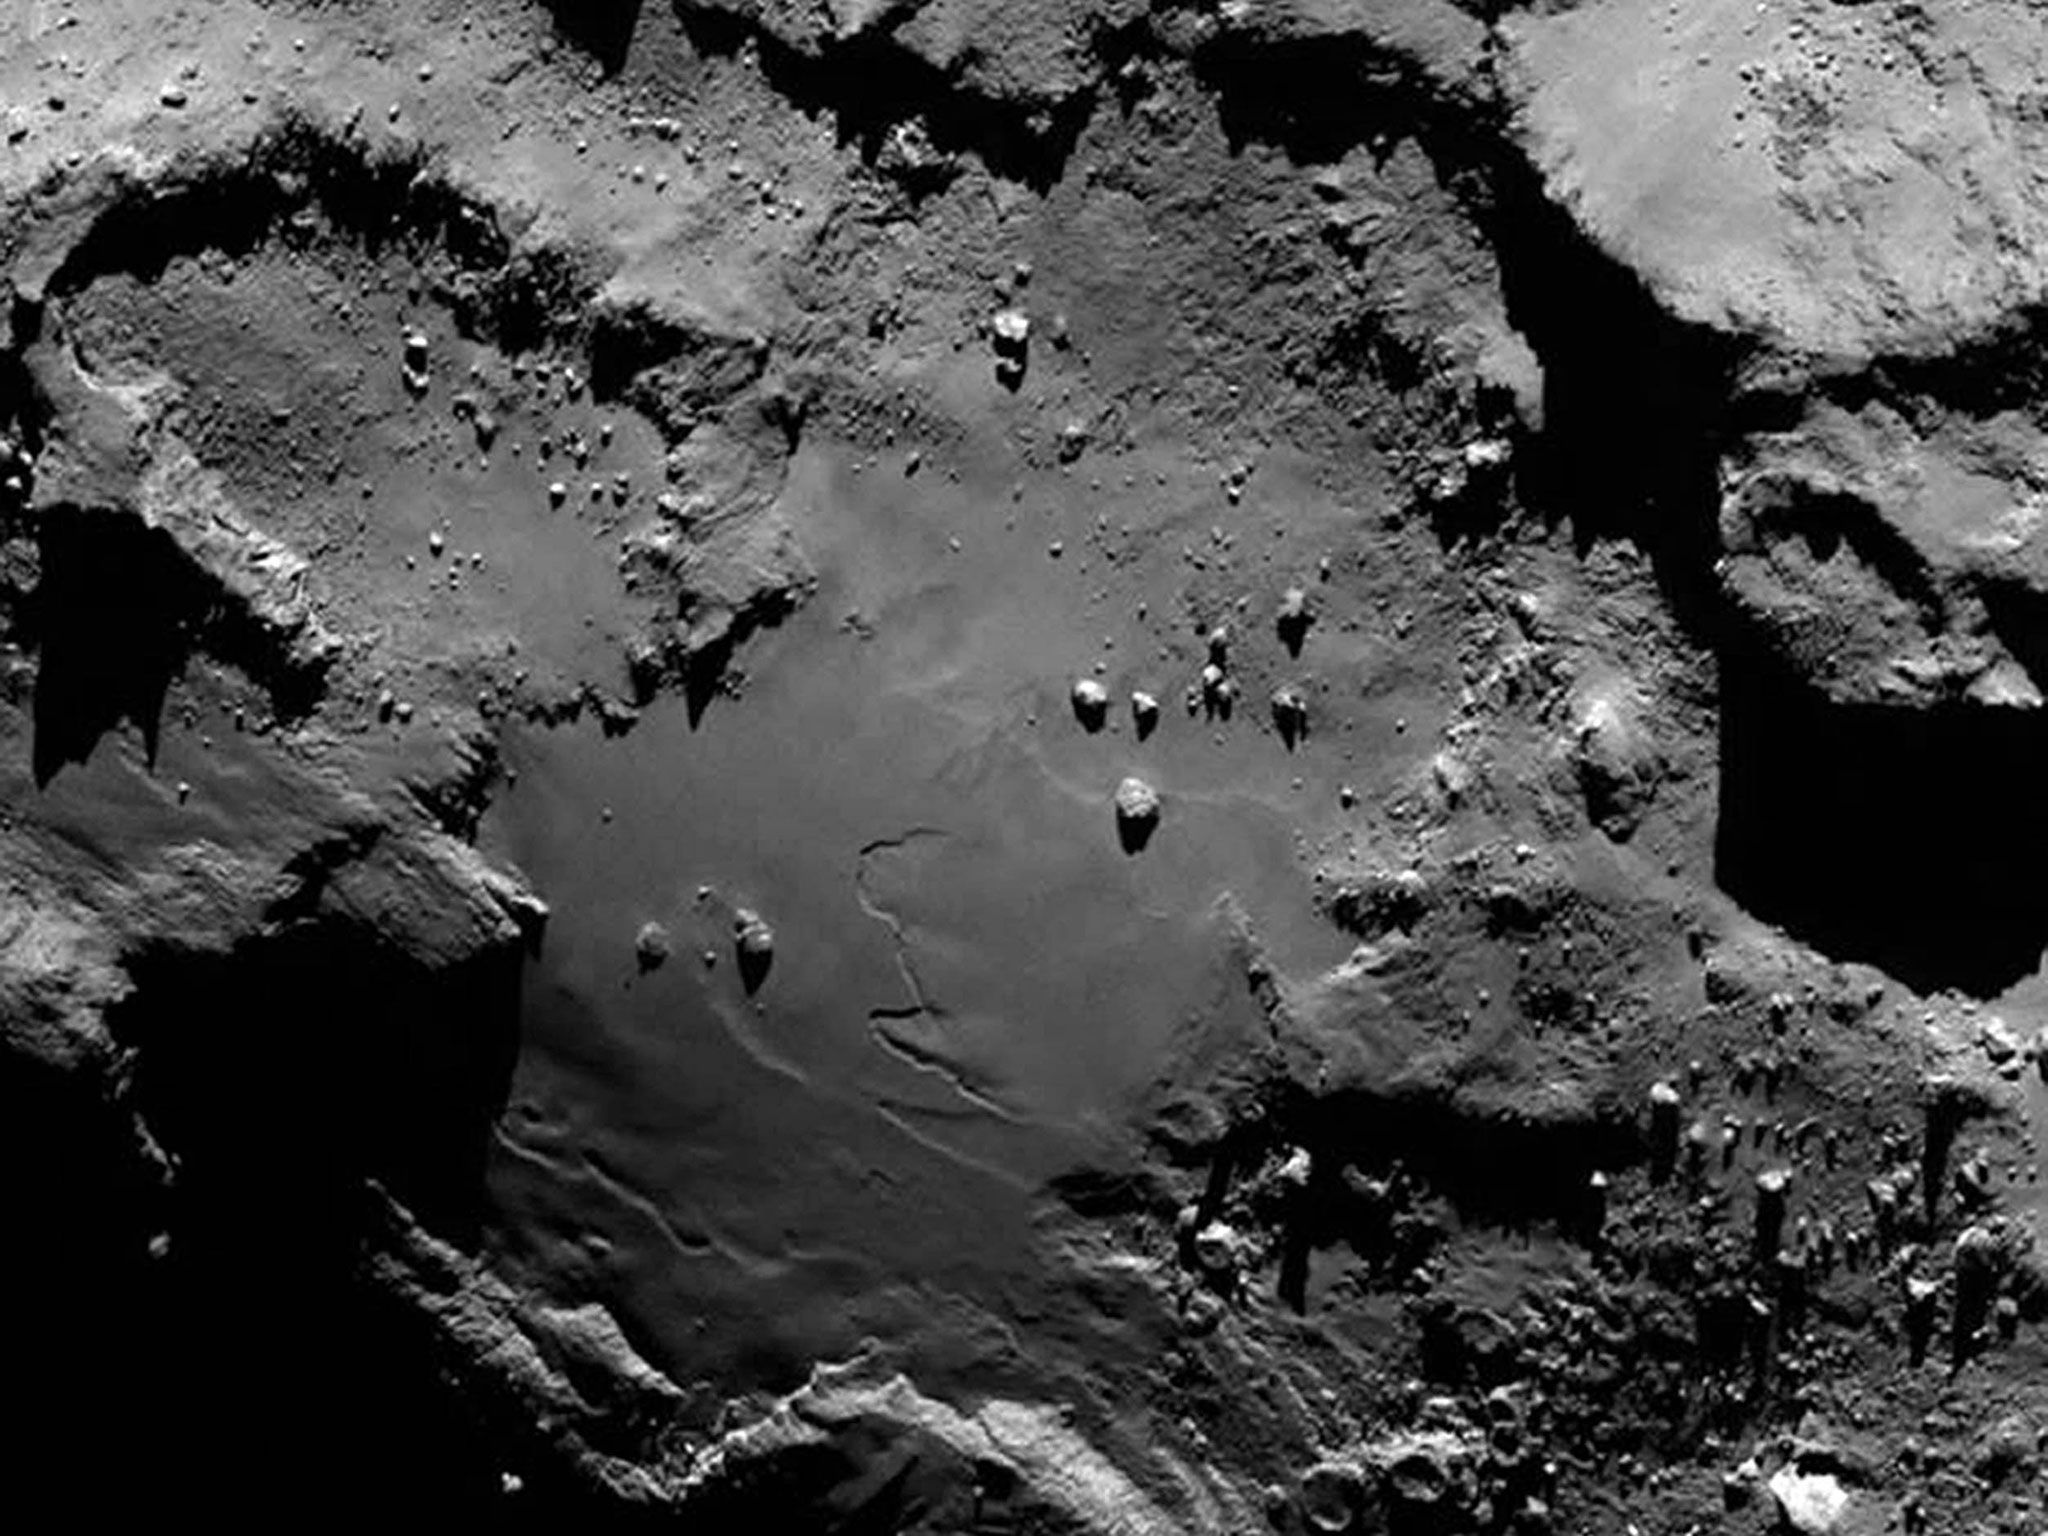 Rosetta mission: Comet 67P is surrounded